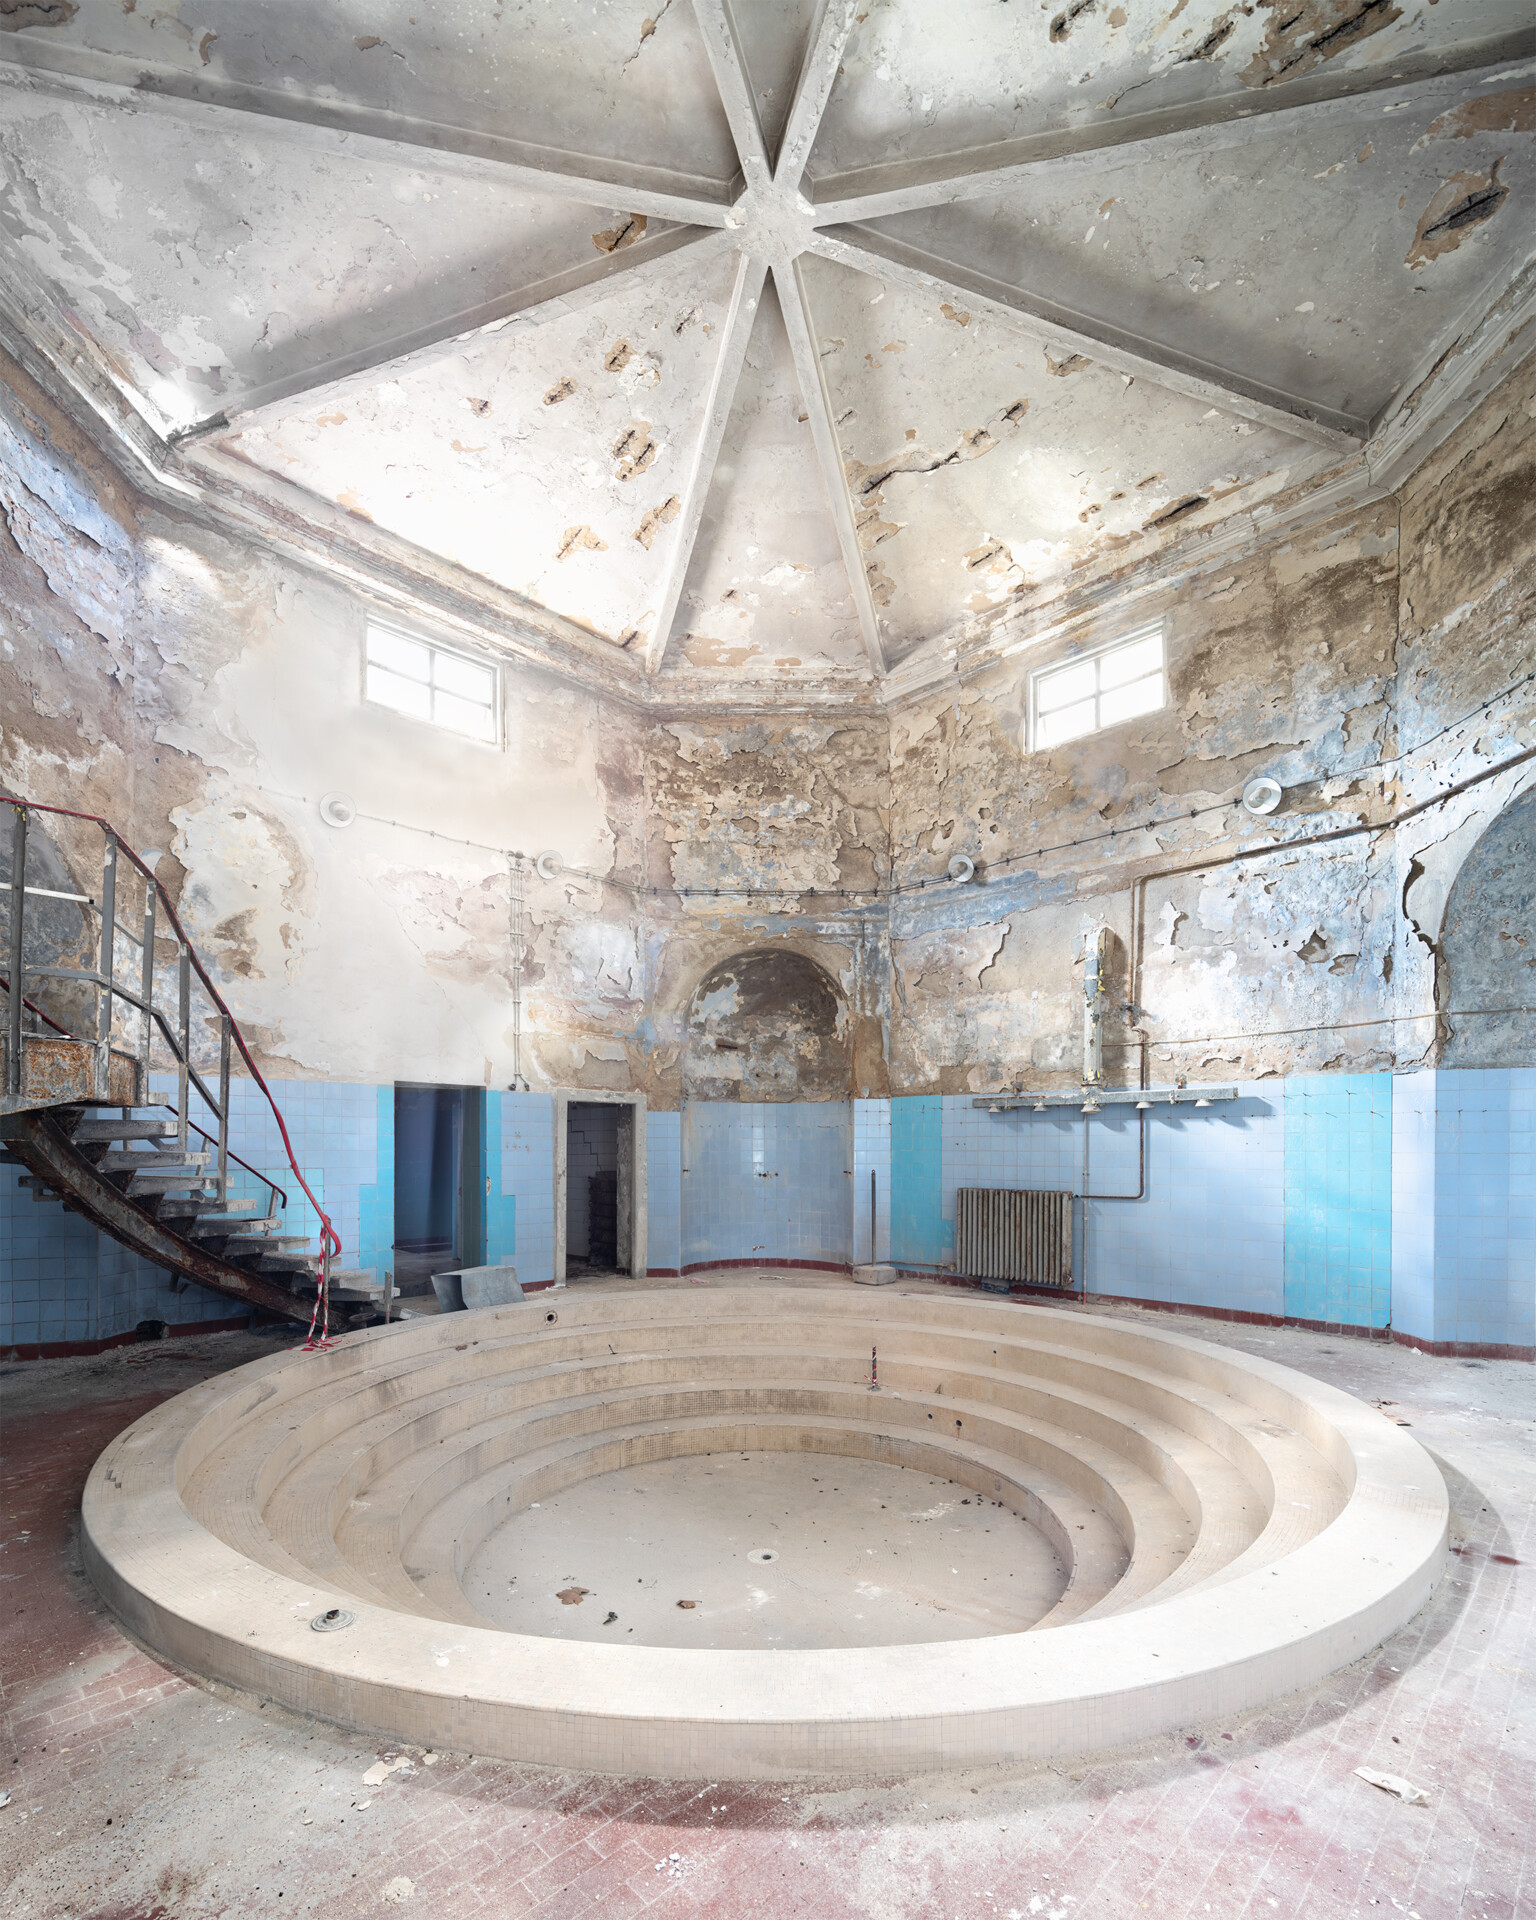 Blue pool with huge decay inside derelict baths in Europe